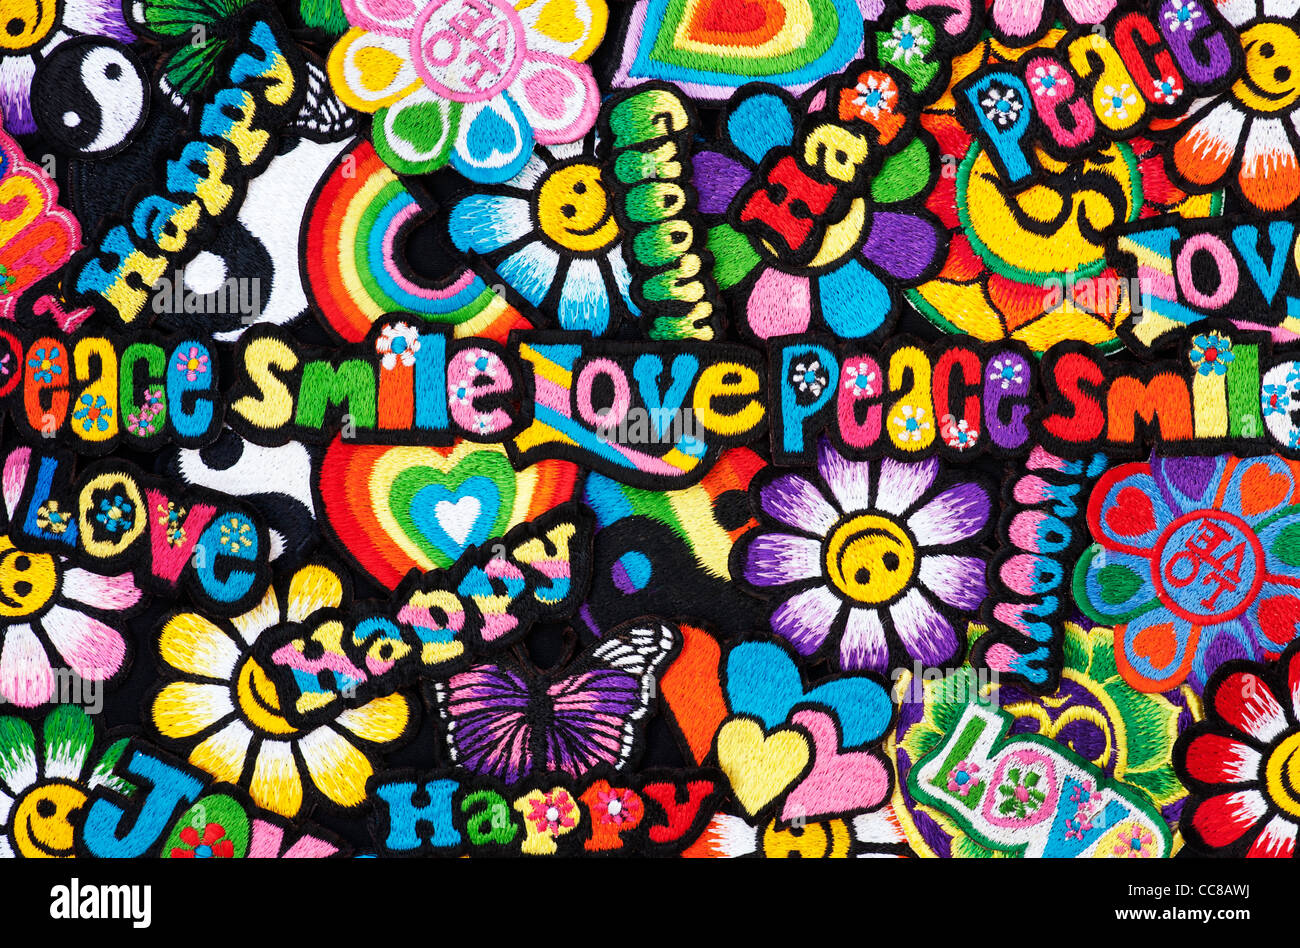 Embroidery iron on patches of Multicoloured Love, Peace, Happy, Smile, Joy and Groovy words on a black background Stock Photo